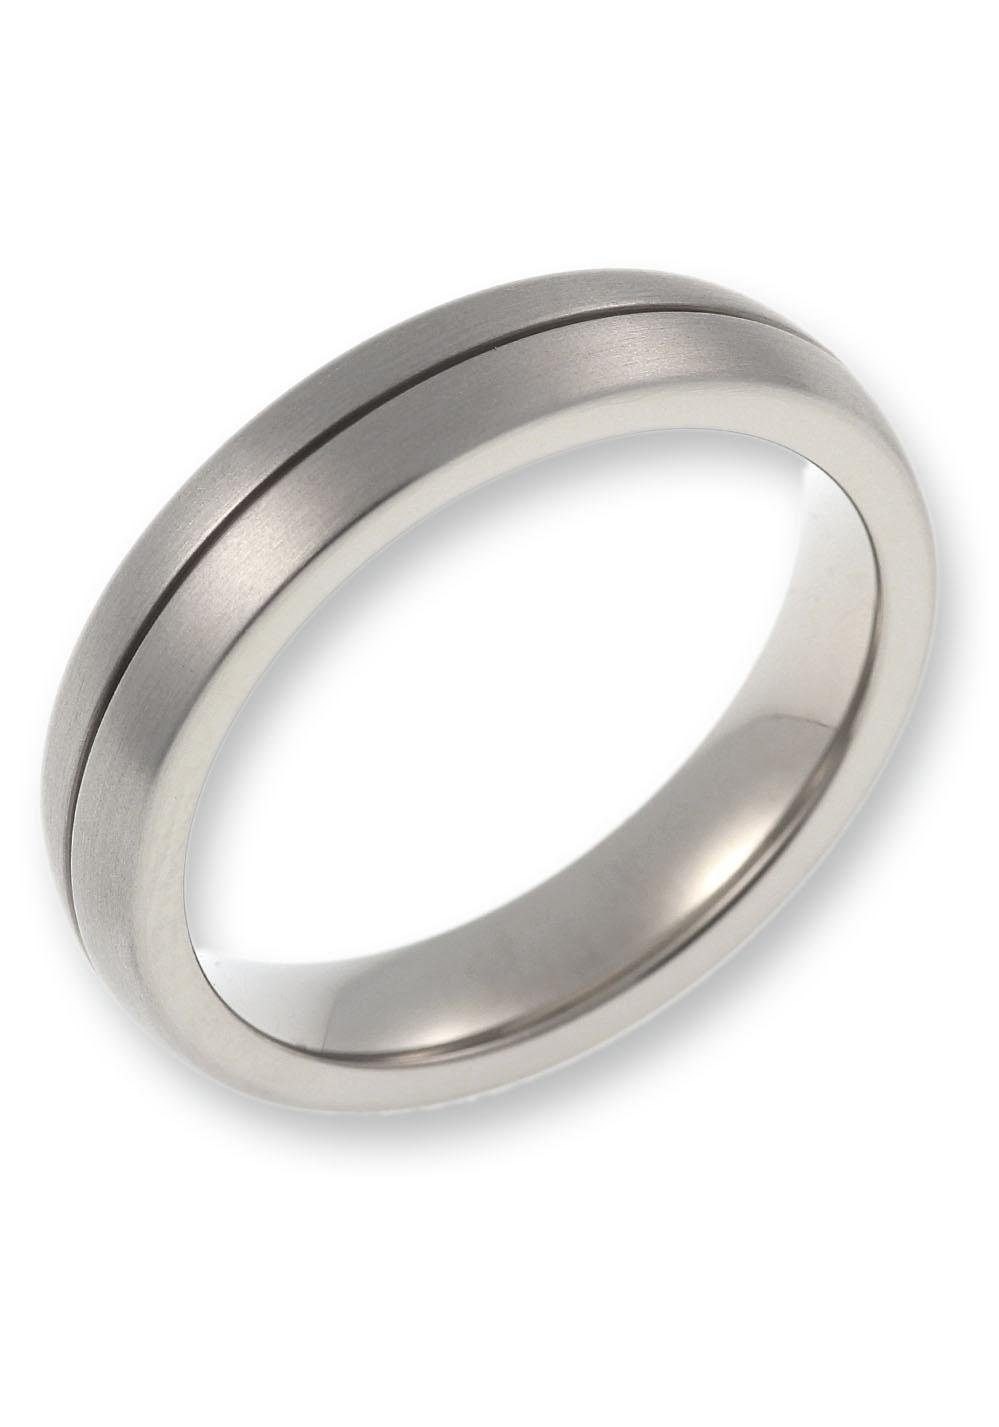 CORE by Schumann Design Trauring »20006183-DR, 20006183-HR, ST051.04«, Made in Germany - wahlweise mit oder ohne Diamant